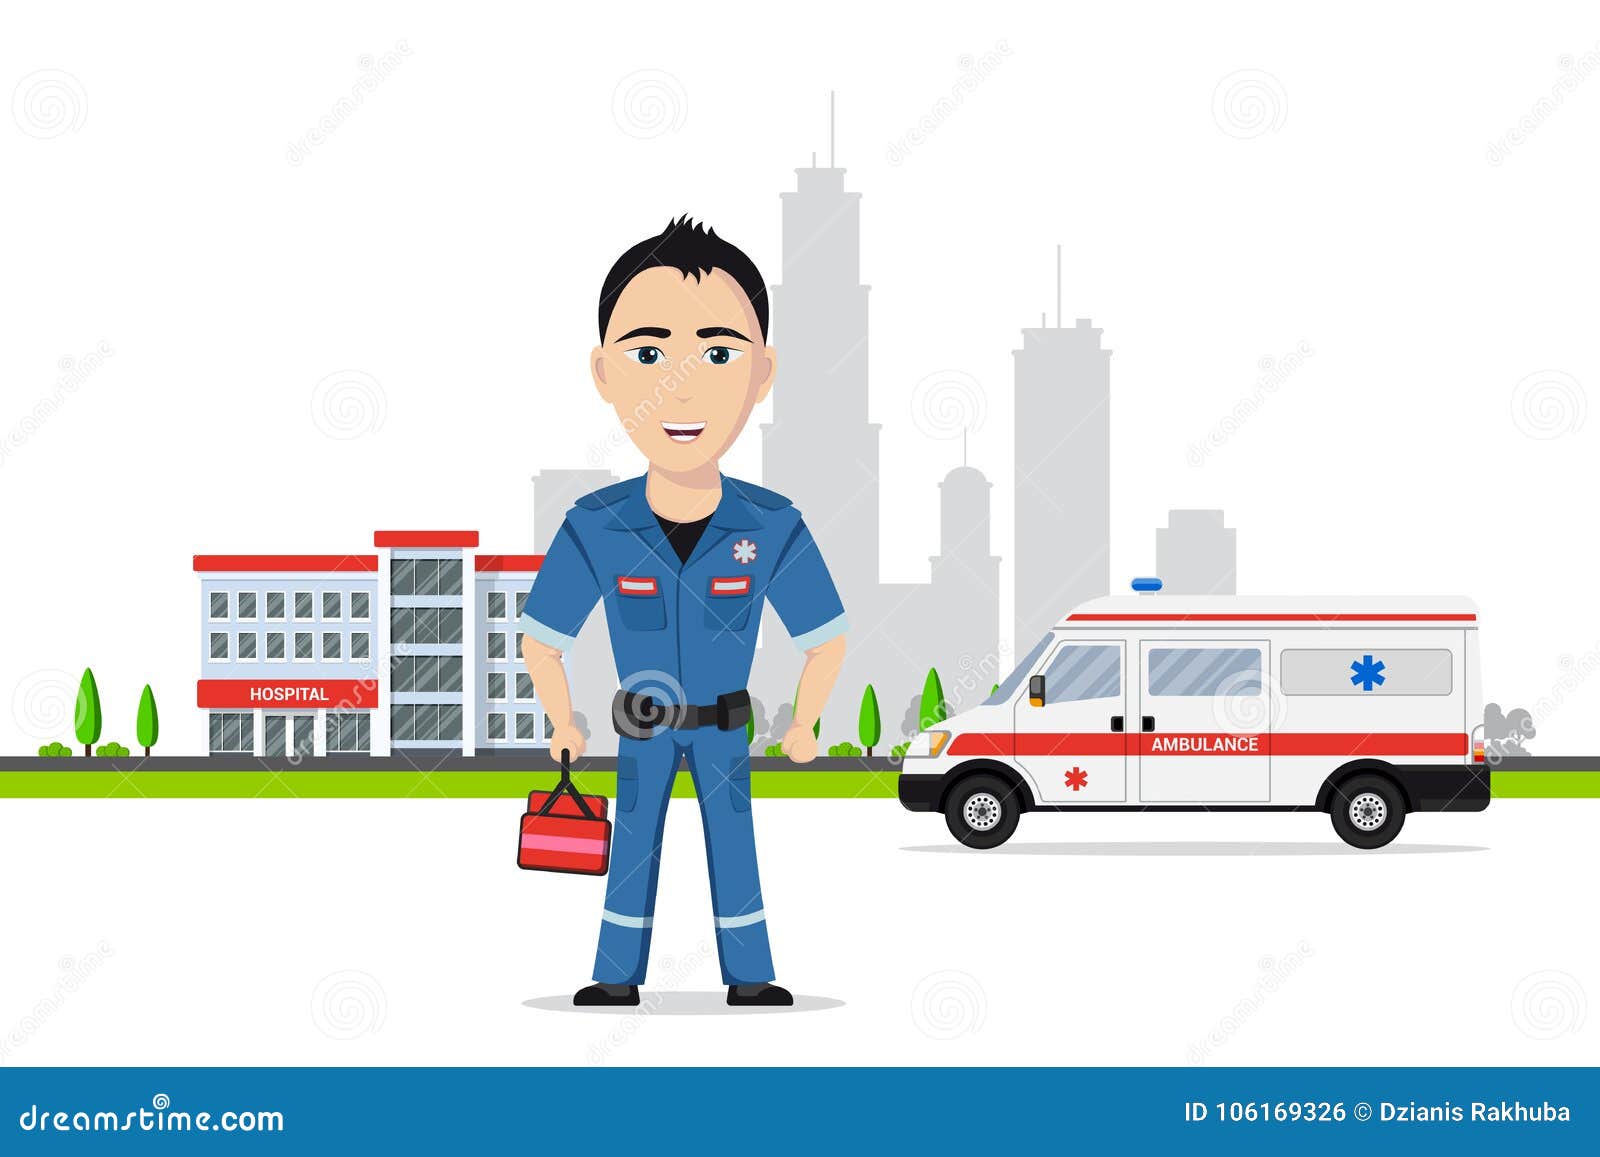 picture of a paramedic